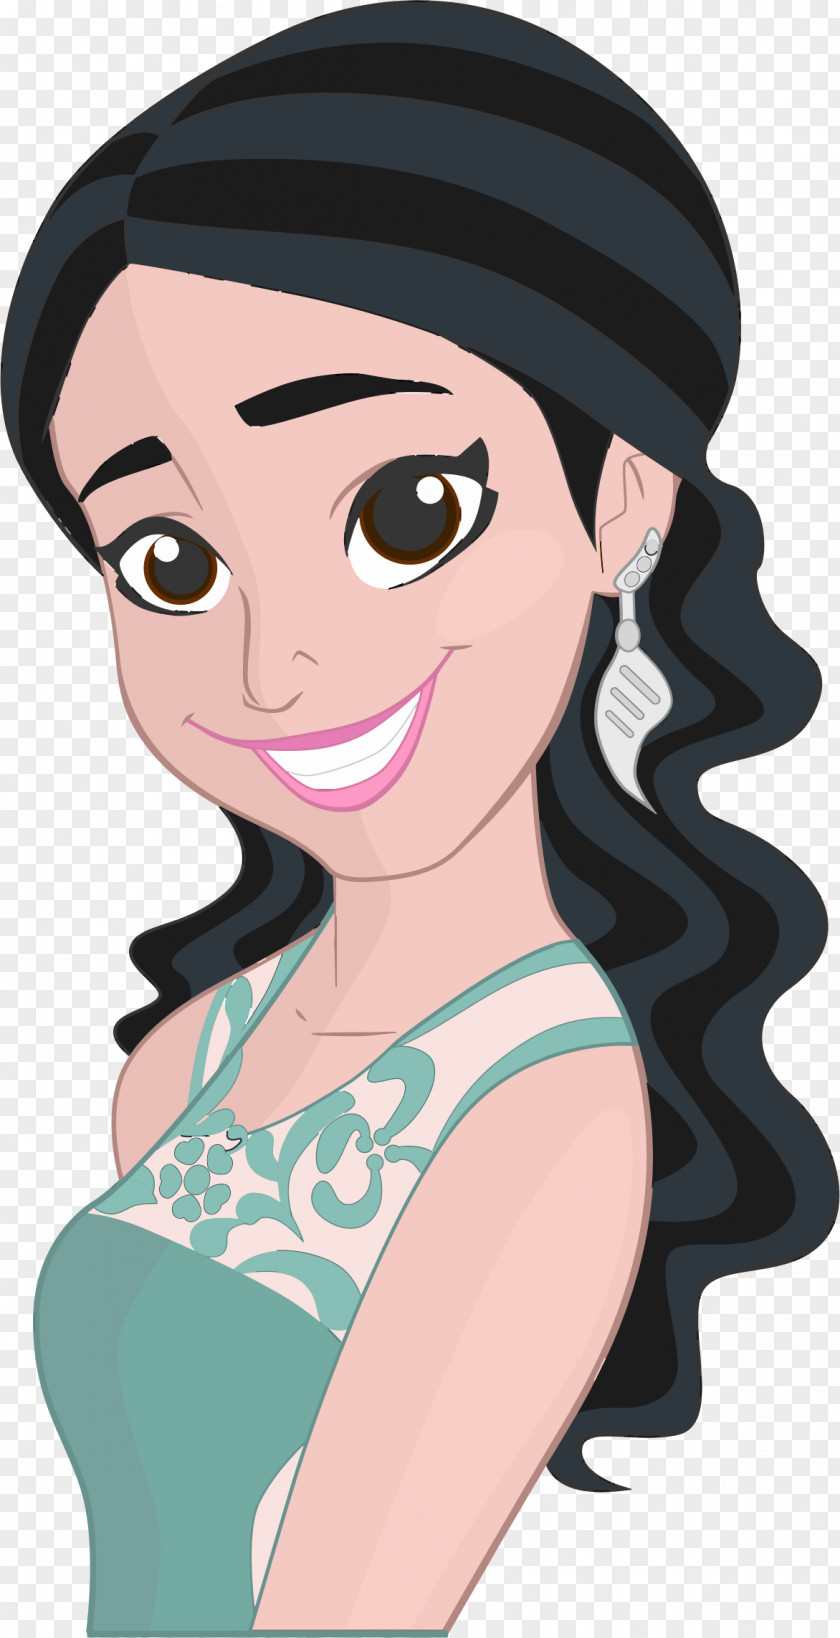 Happy Women's Day Smile Woman Clip Art PNG